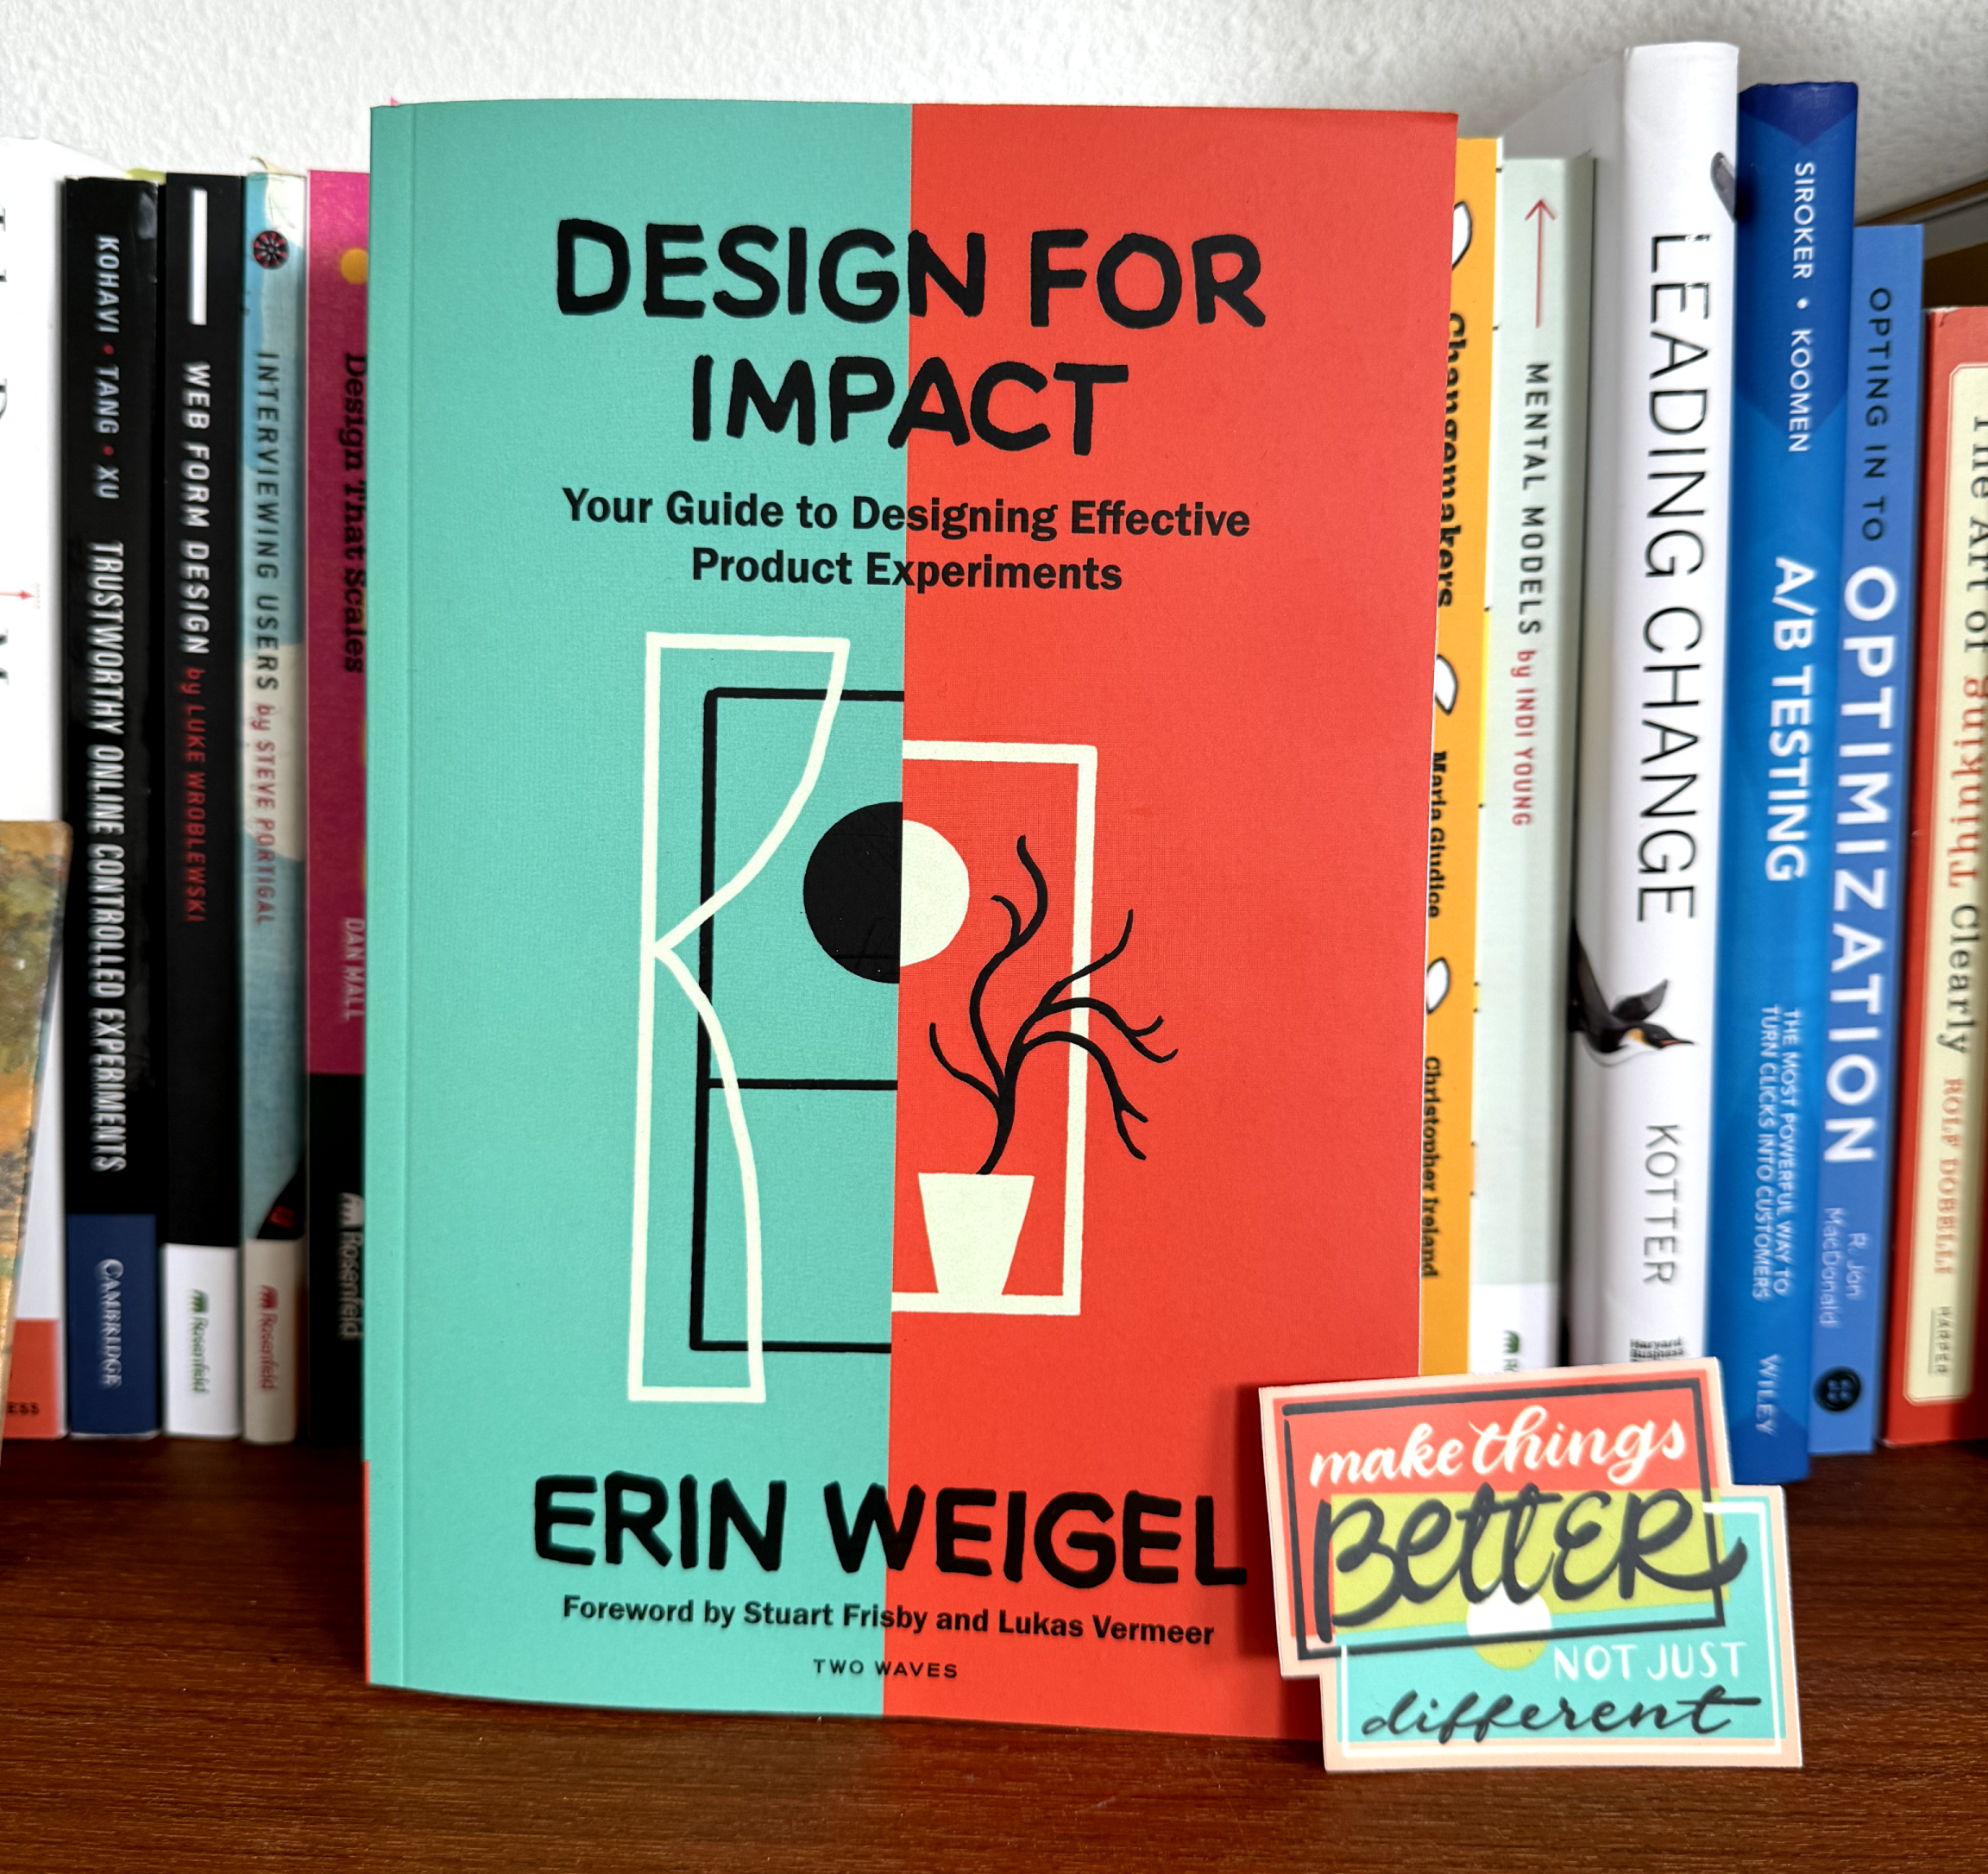 Design for Impact: Your Guide to Designing Effective Product Experiments book by Erin Weigel on a bookshelf. Propped up against the book is a die cut sticker that says, "Make things better—not just different"